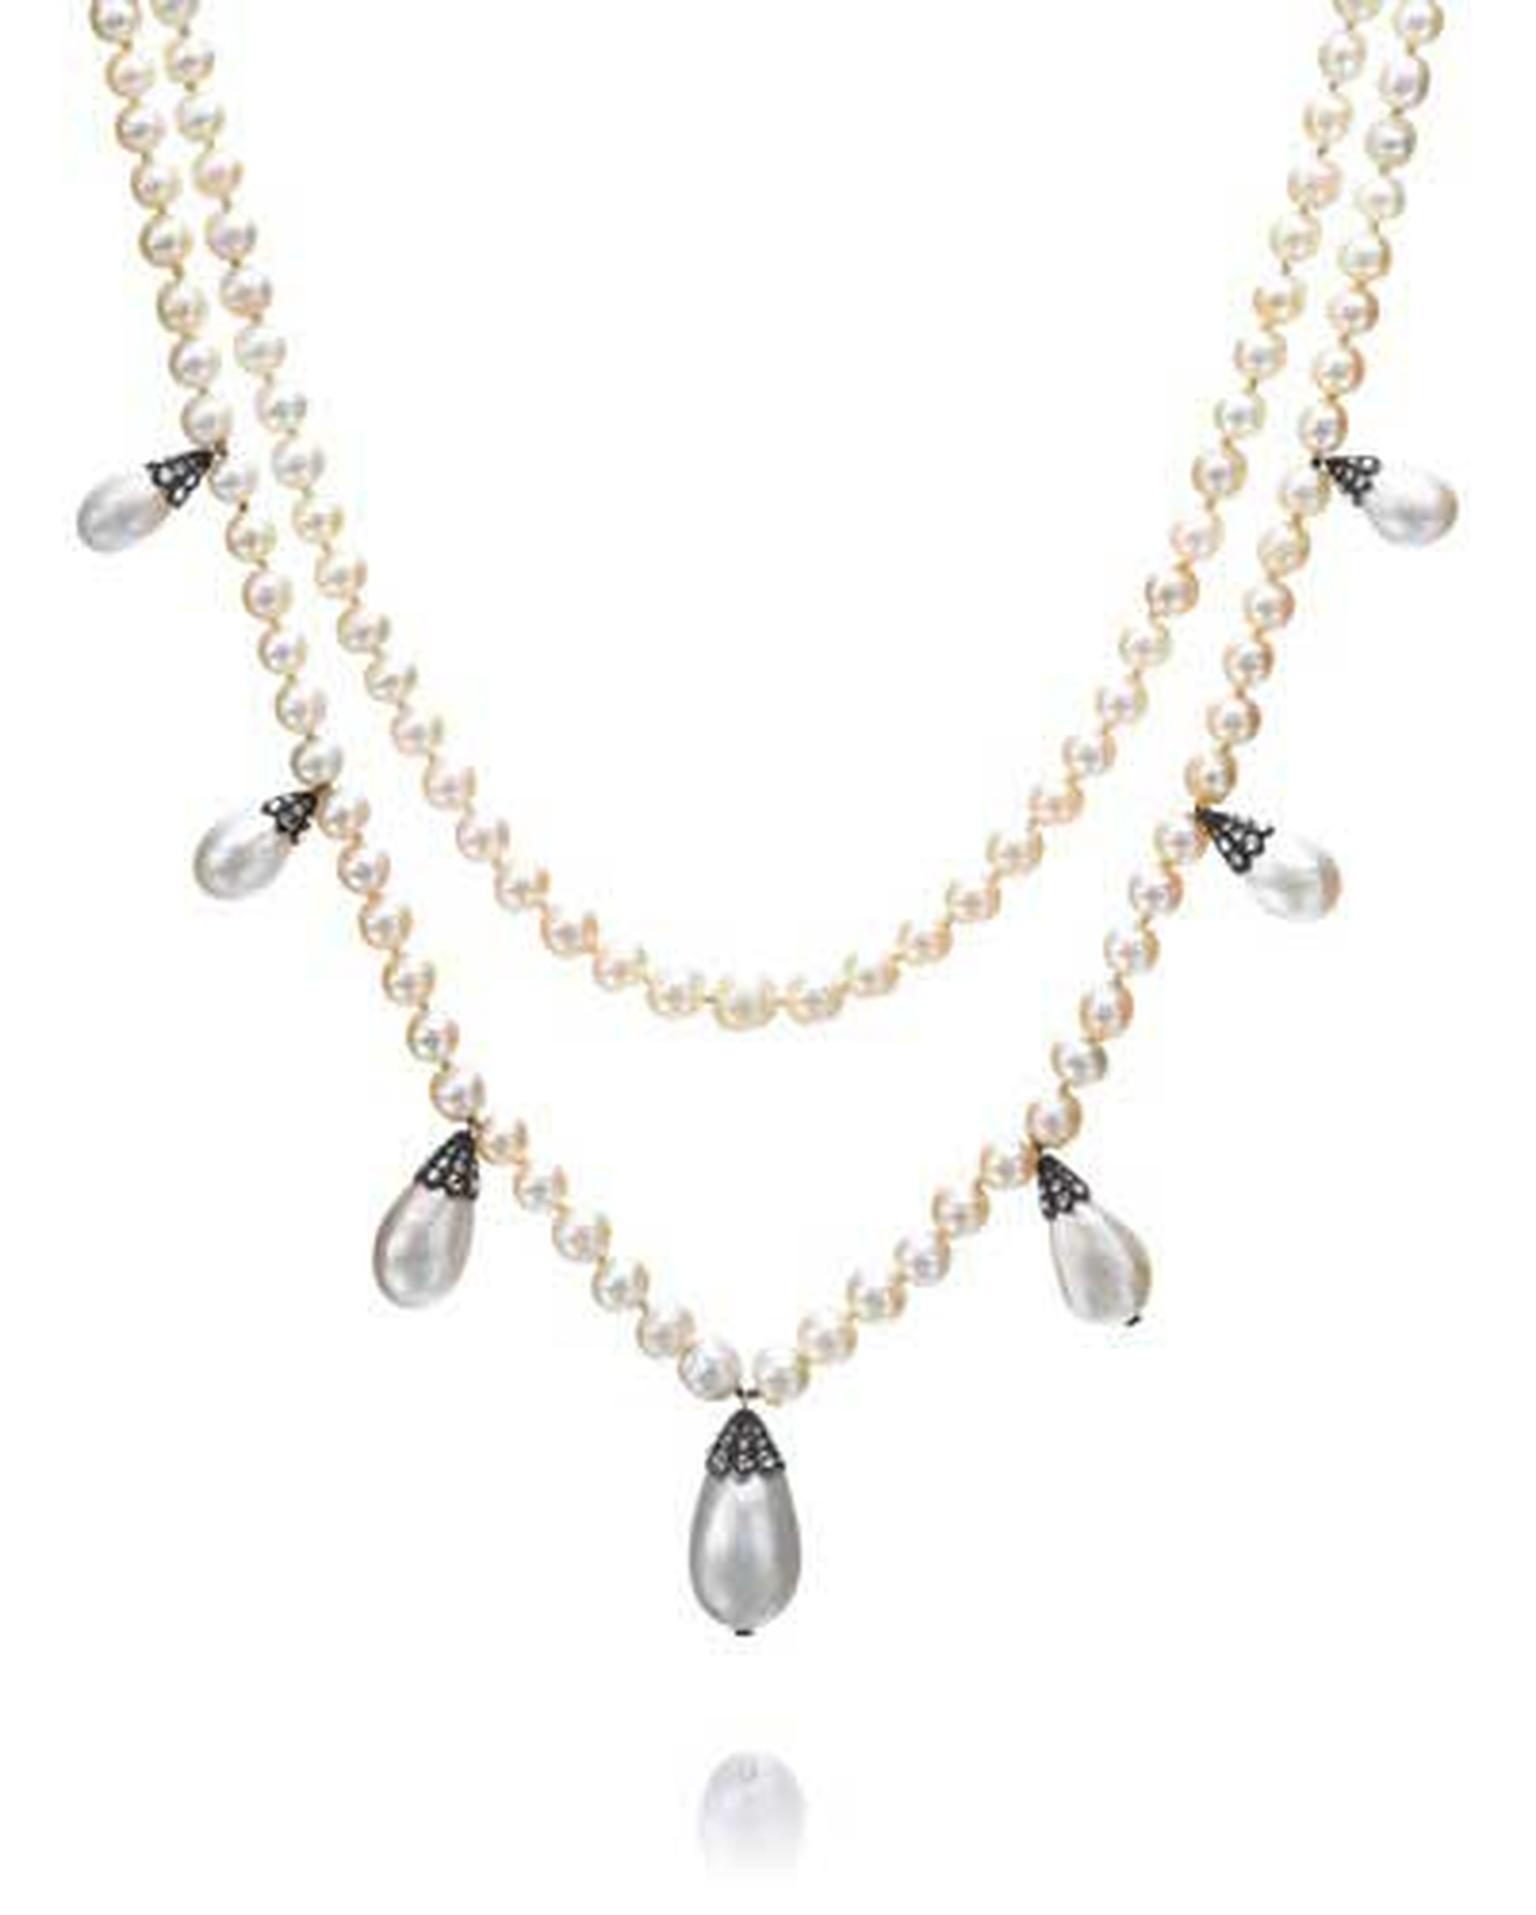 Another highlight of Sotheby's Magnificent and Noble Jewels auction in Geneva was a natural pearl and diamond necklace that was owned by Joséphine de Beauharnais (1807-1876). The necklace sold for $3.43 million, more than doubling its pre-sale estimate.